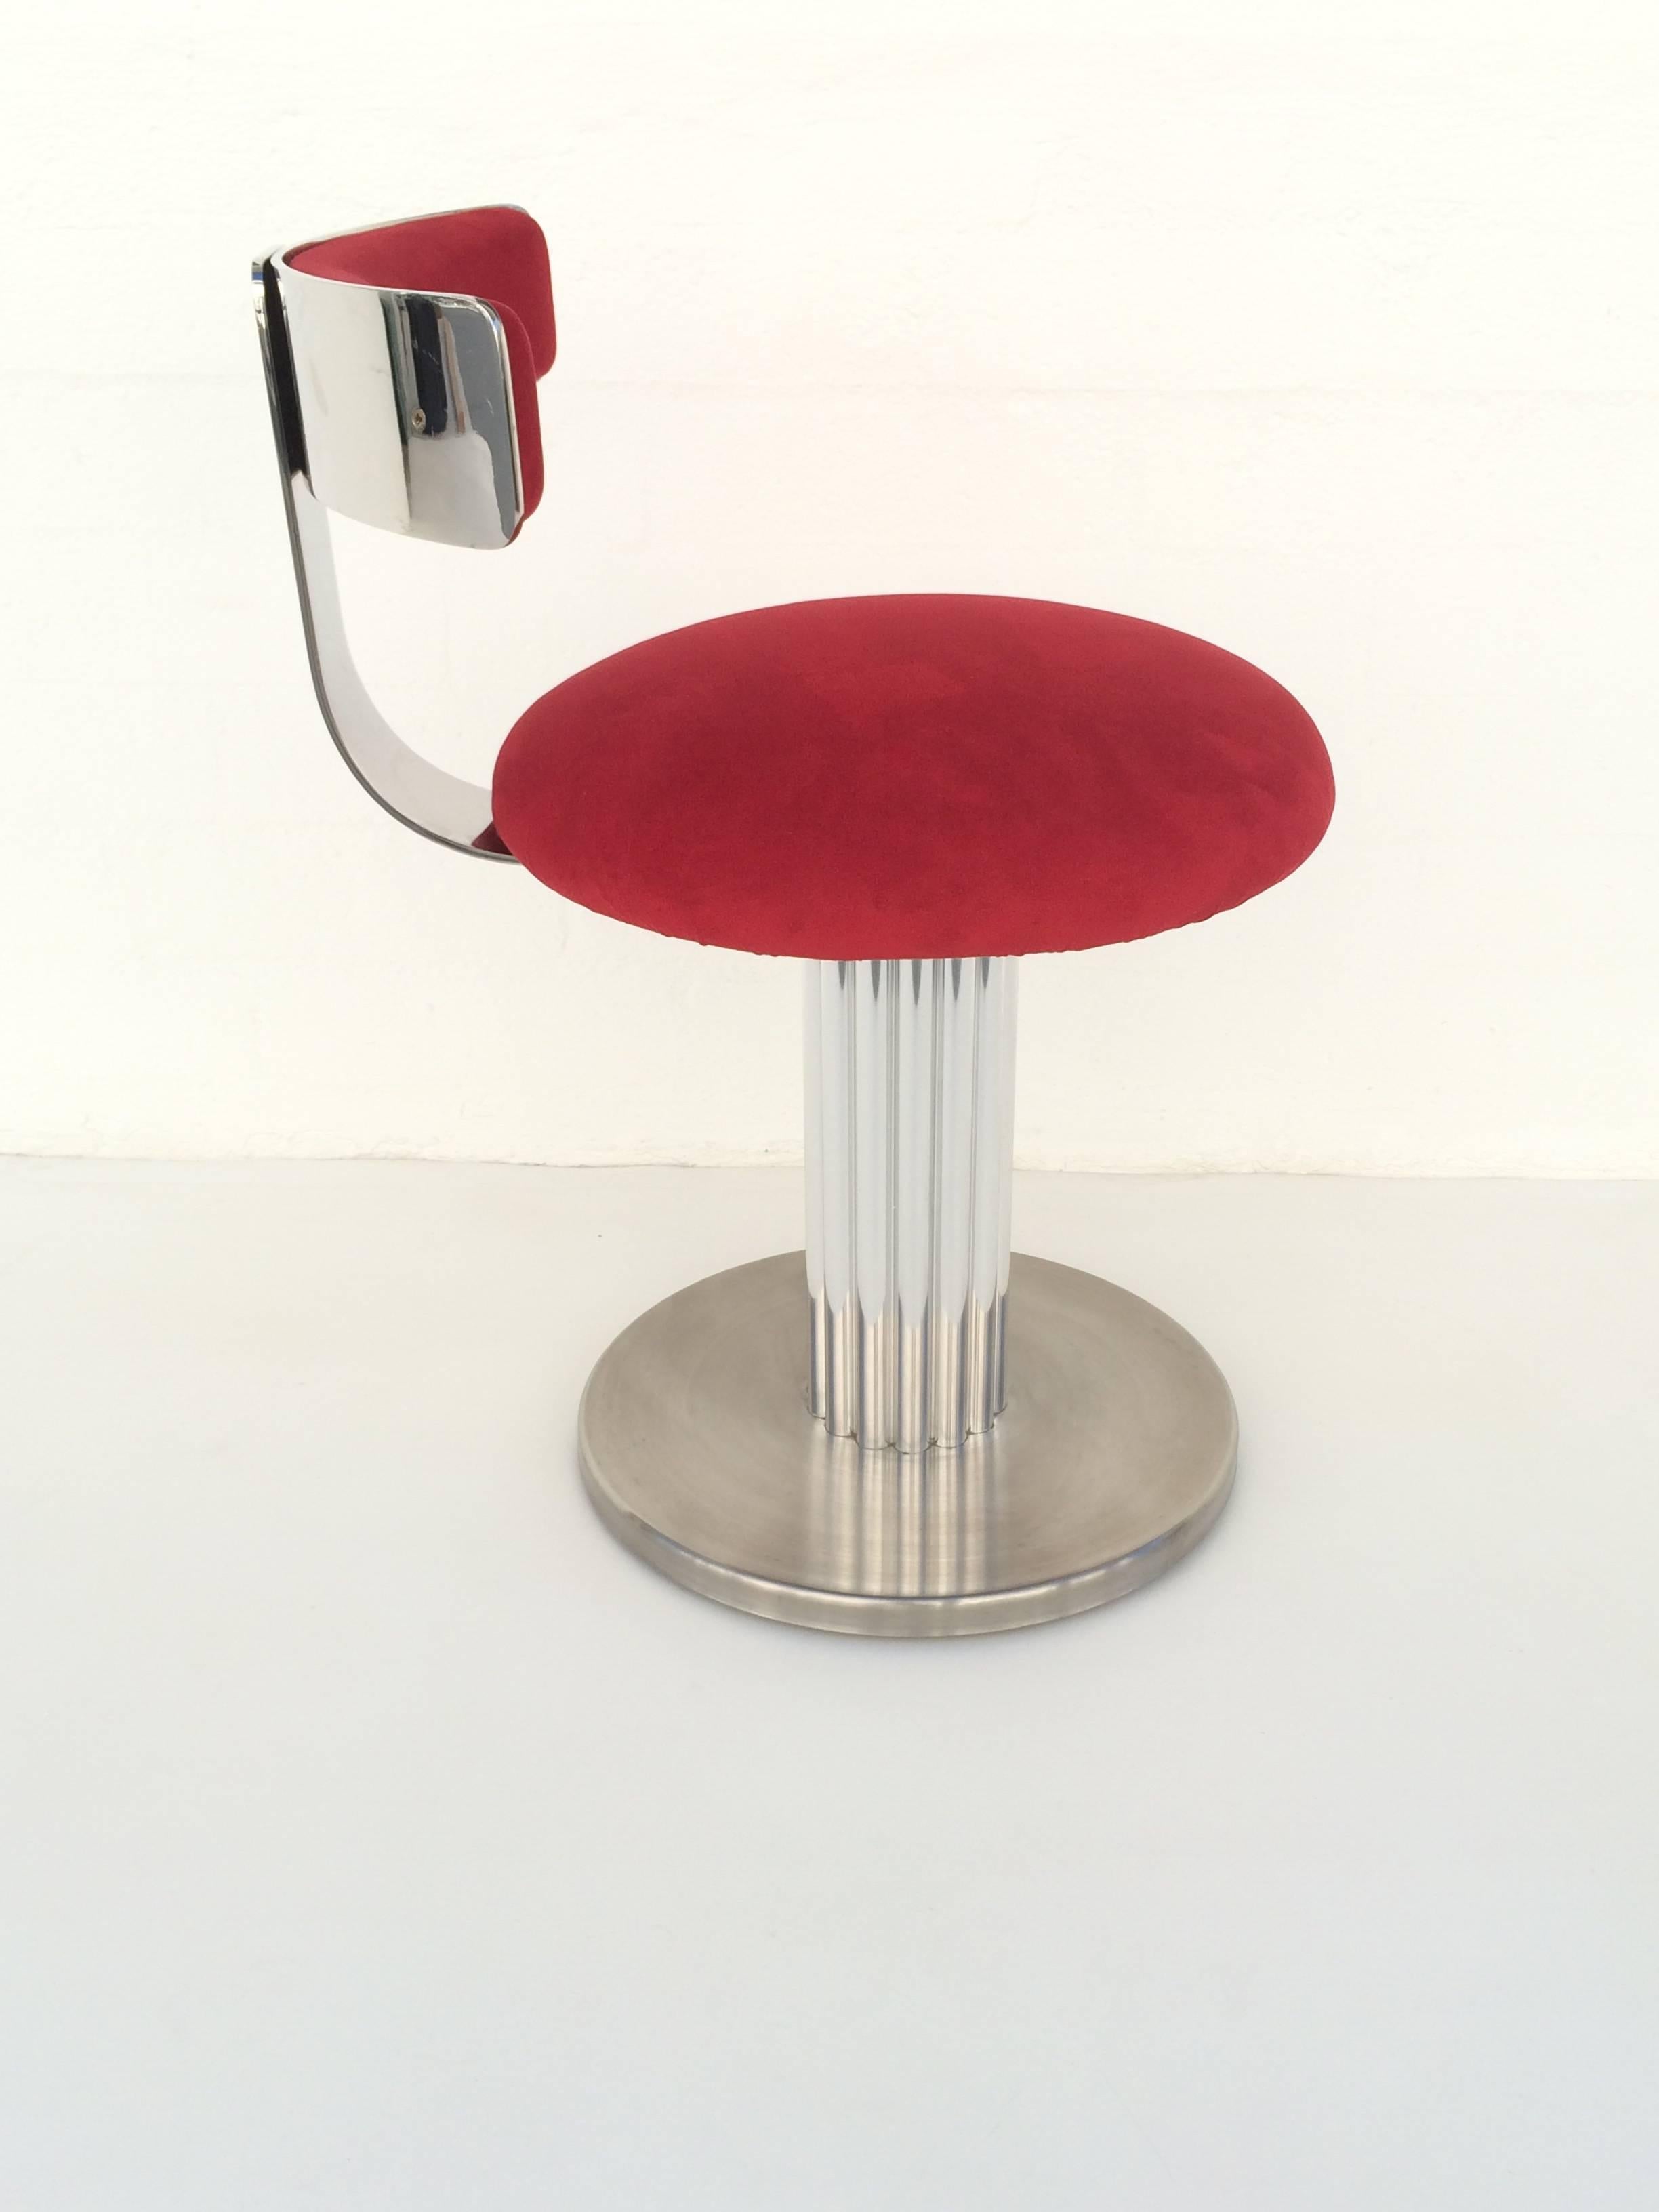 Late 20th Century Set of Four Chrome Swivel Stools Made by Design for Leisure Ltd